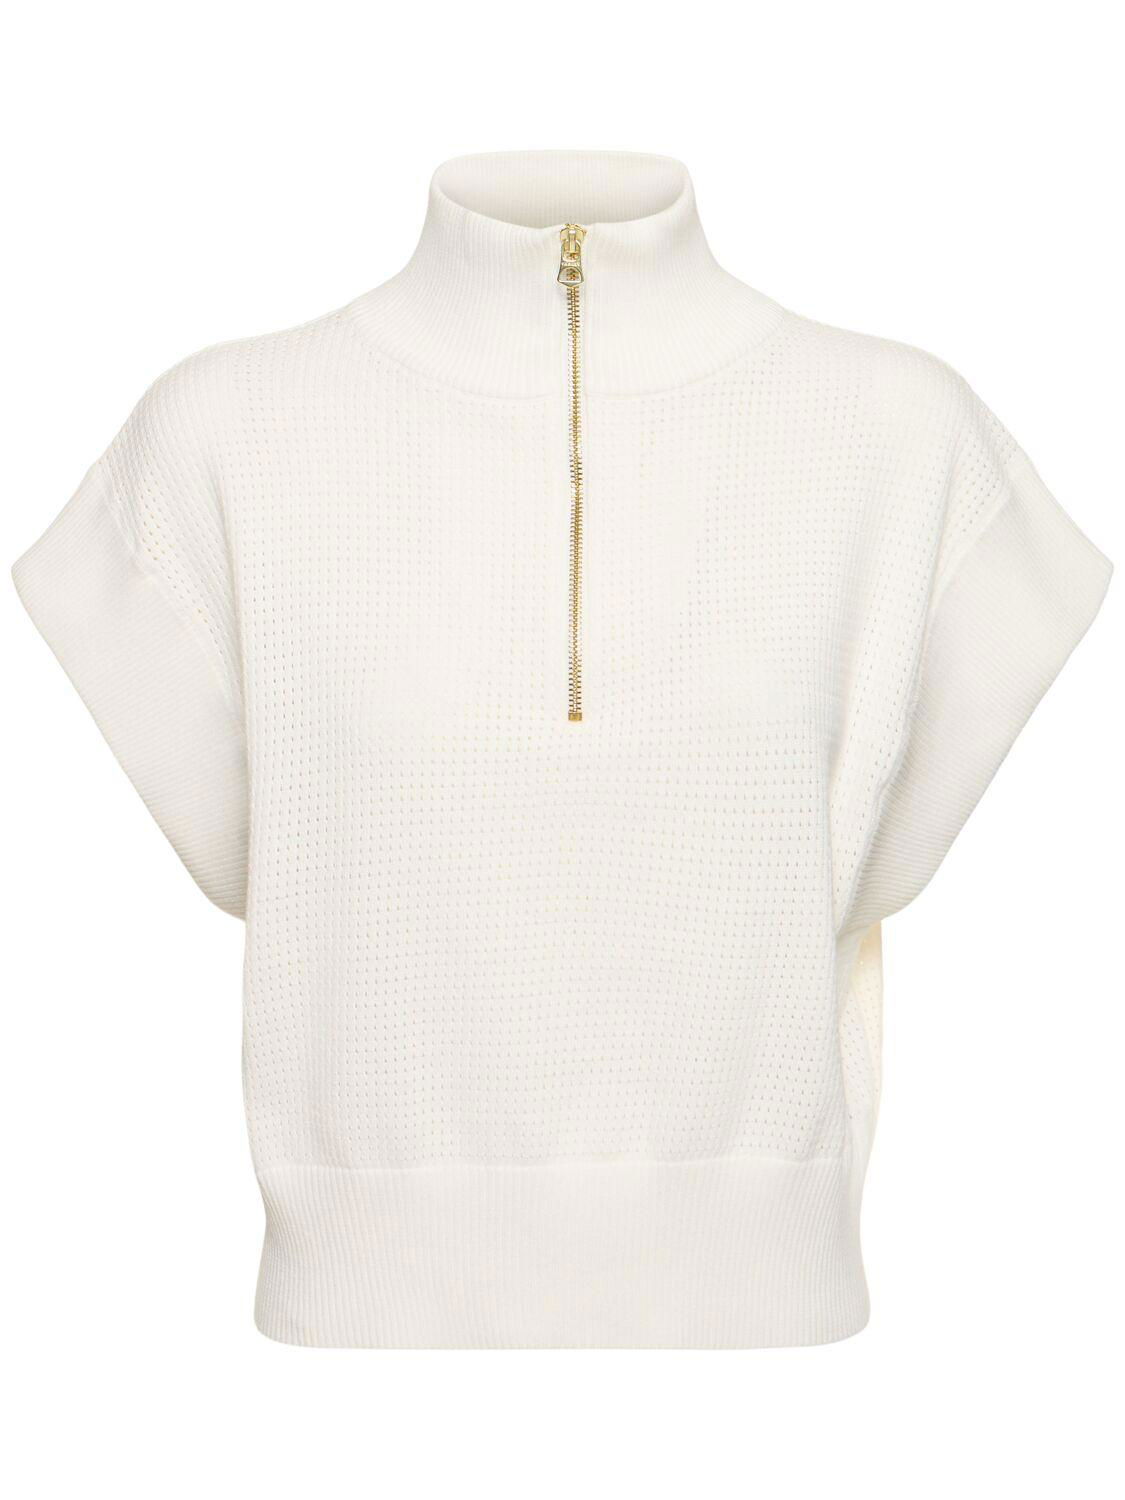 Fulton Cropped Knit Top by VARLEY